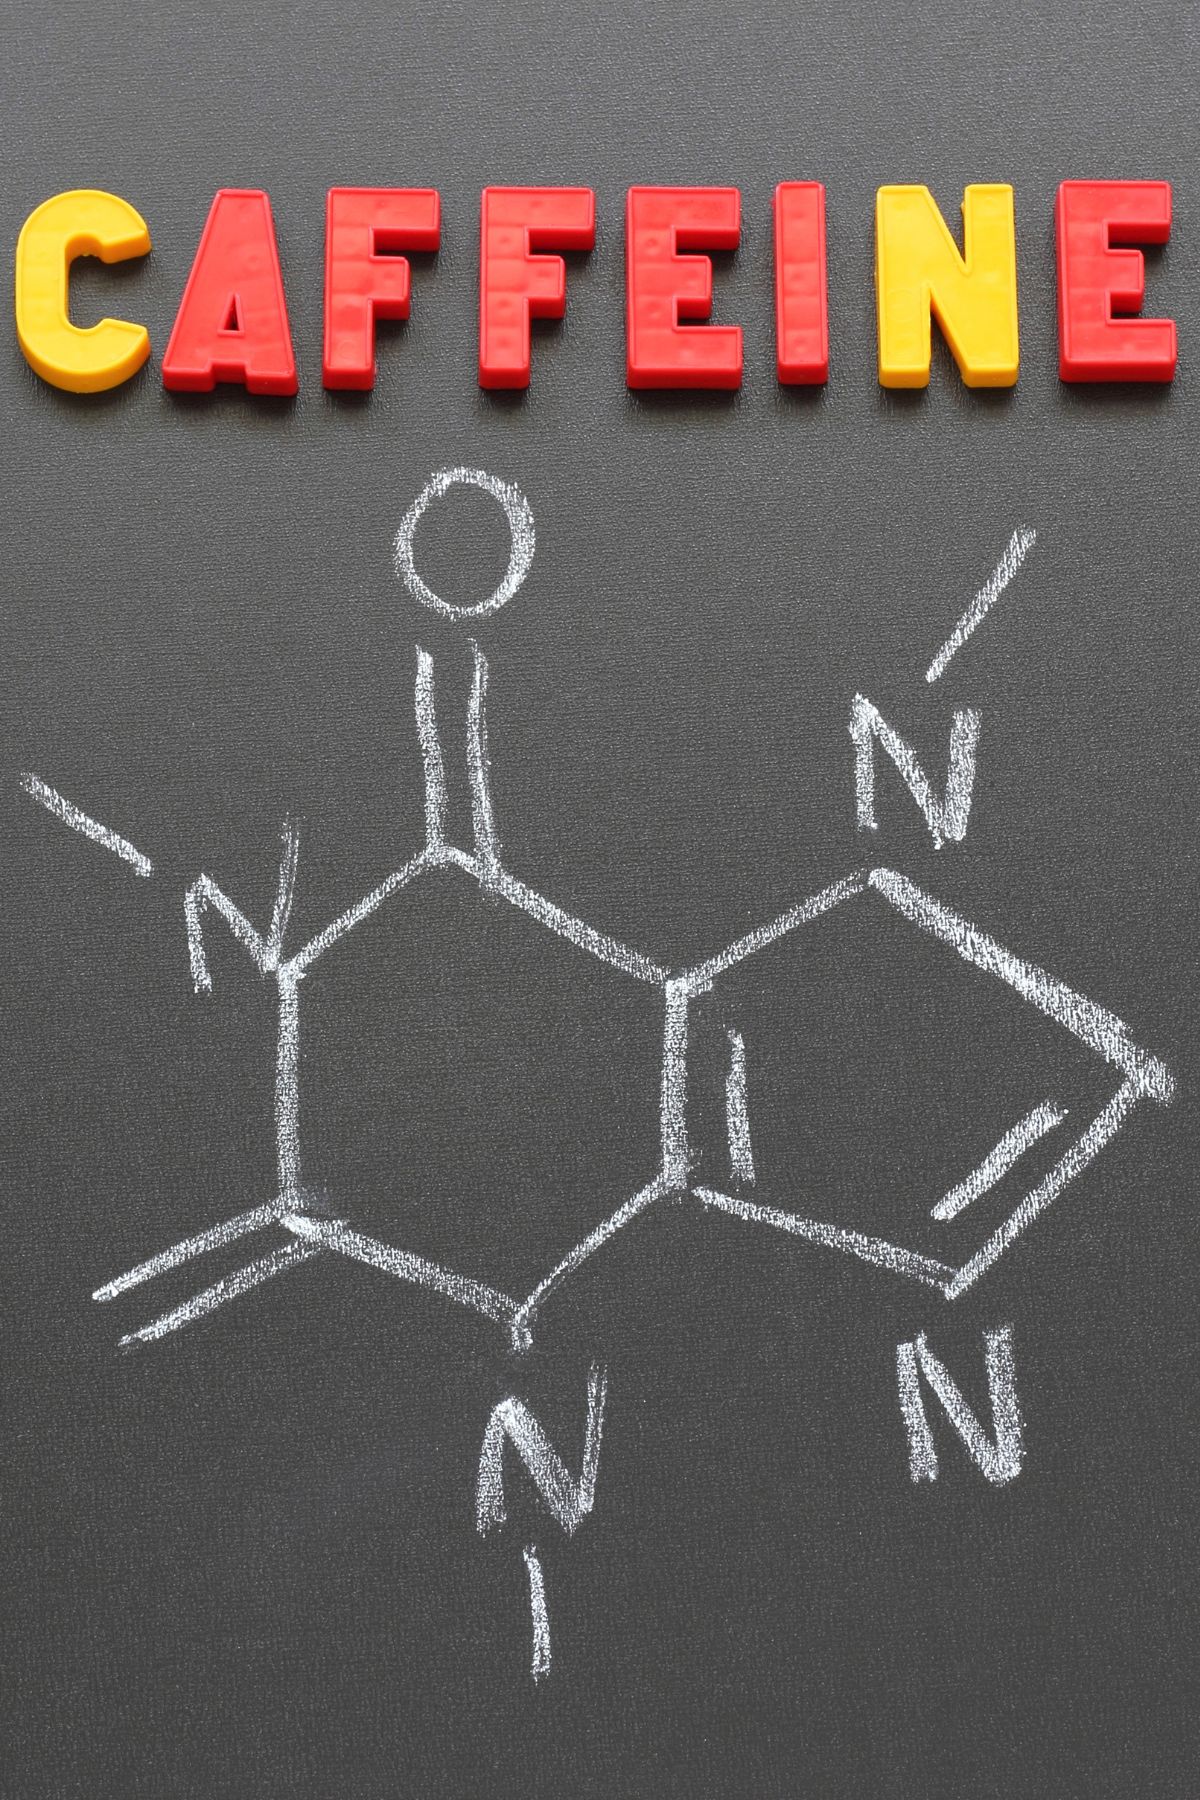 the word caffeine on a blackboard over a chalk drawing of the compound.